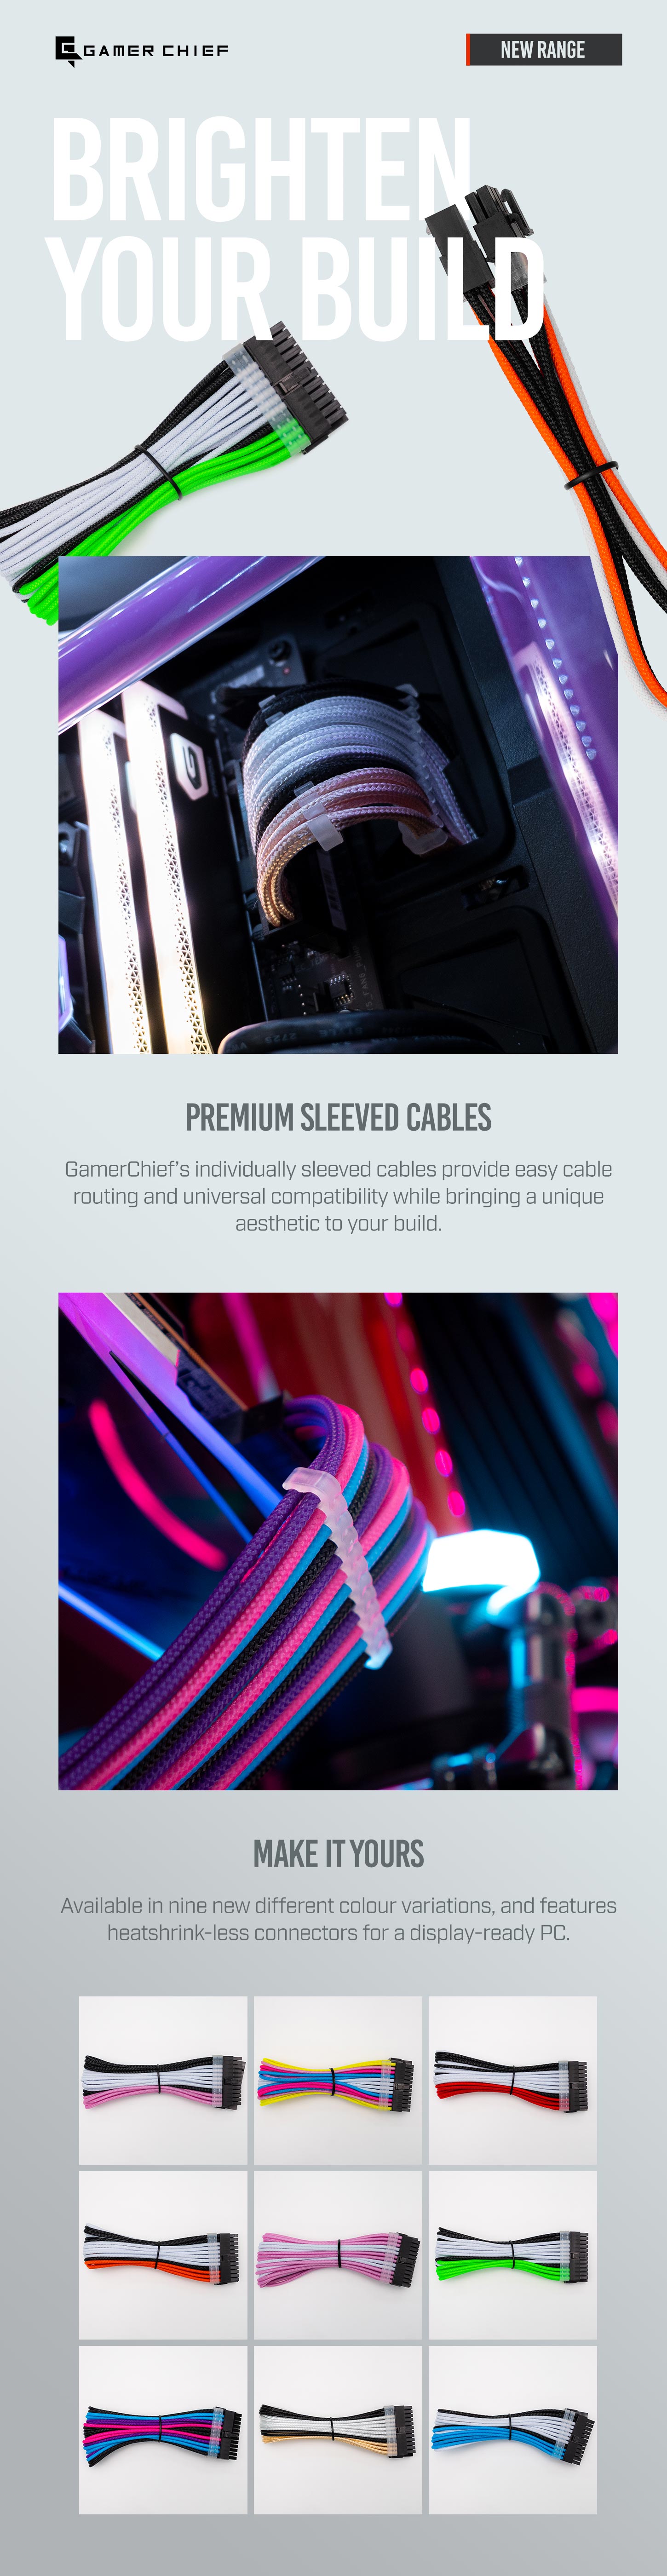 A large marketing image providing additional information about the product GamerChief Elite Series 8-Pin PCIe 30cm Sleeved Extension Cable (Hot Pink/White) - Black Connector - Additional alt info not provided